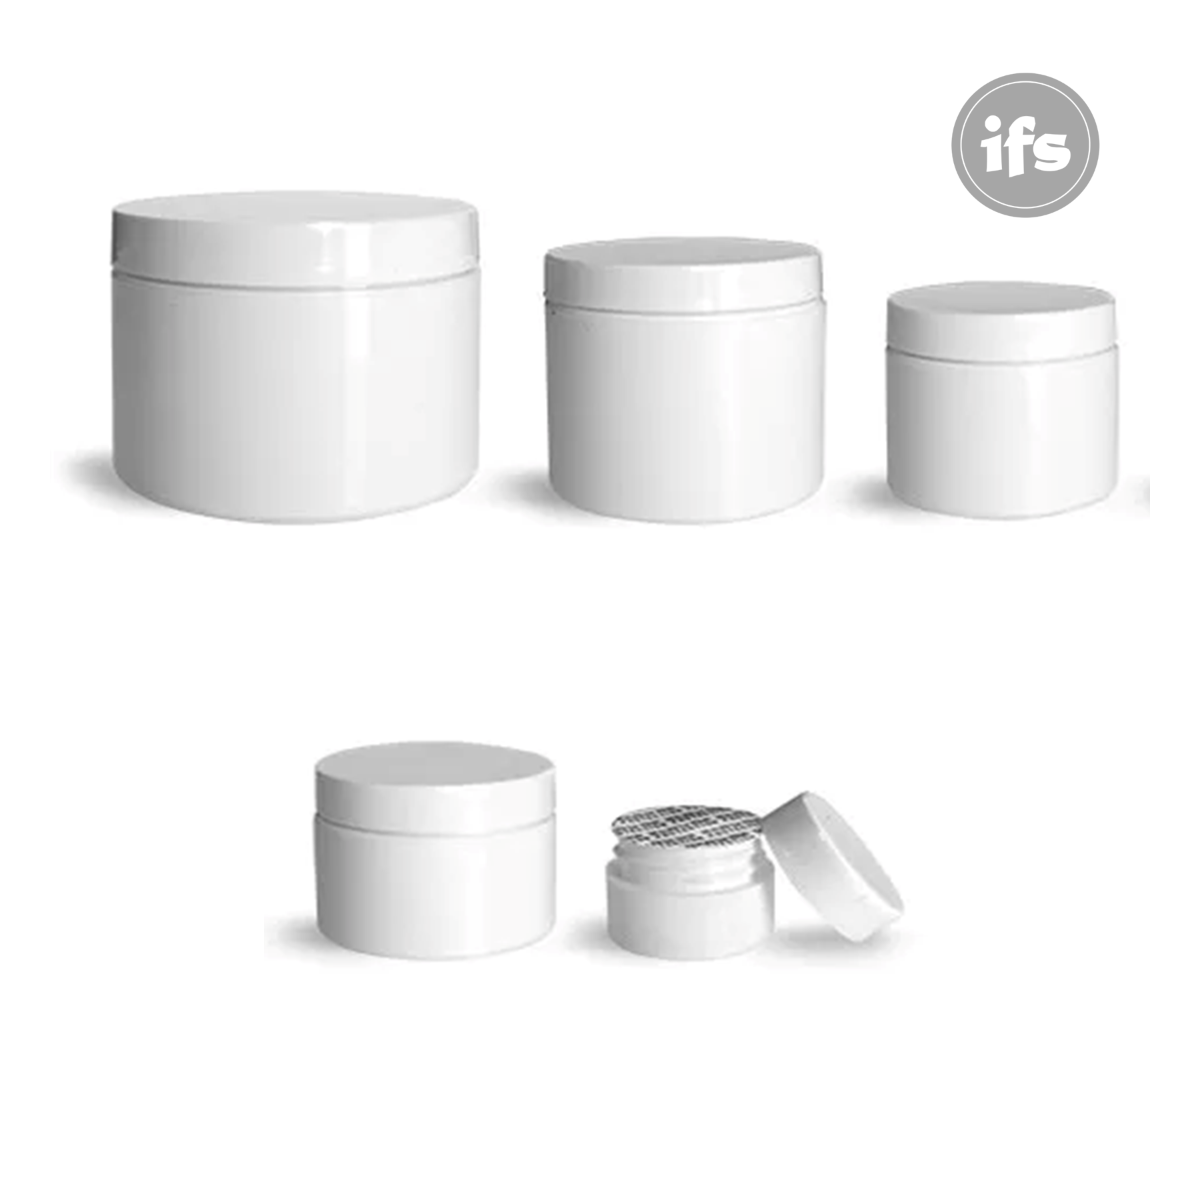 Plastic Jars, White Polypropylene Double Wall Straight Sided Jars w/ White Smooth Caps (1 oz.)